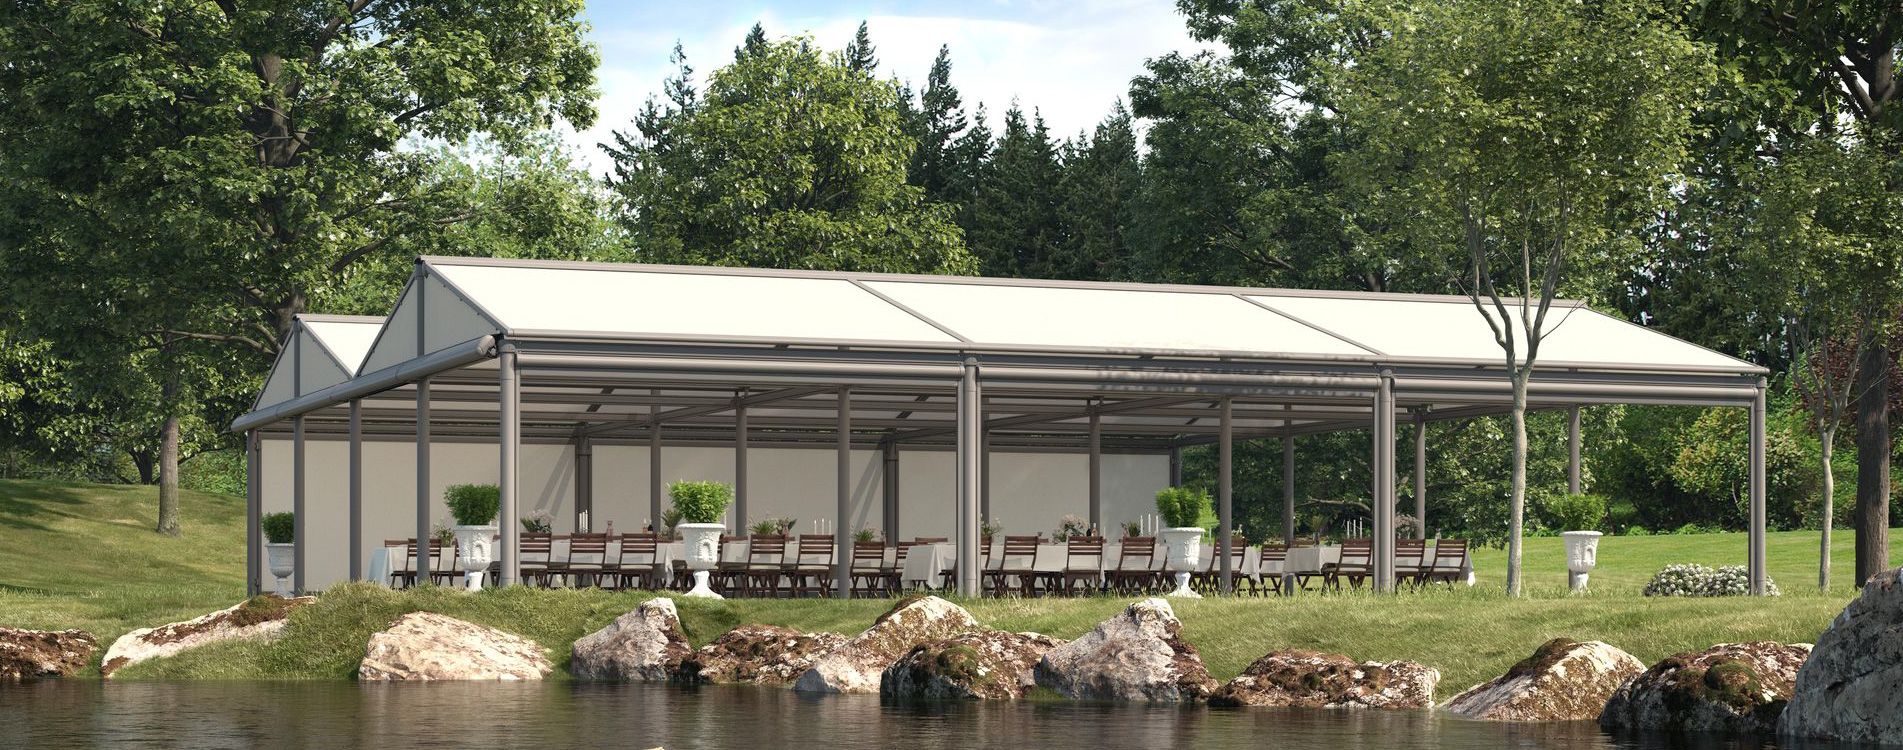 Markilux construct awnings